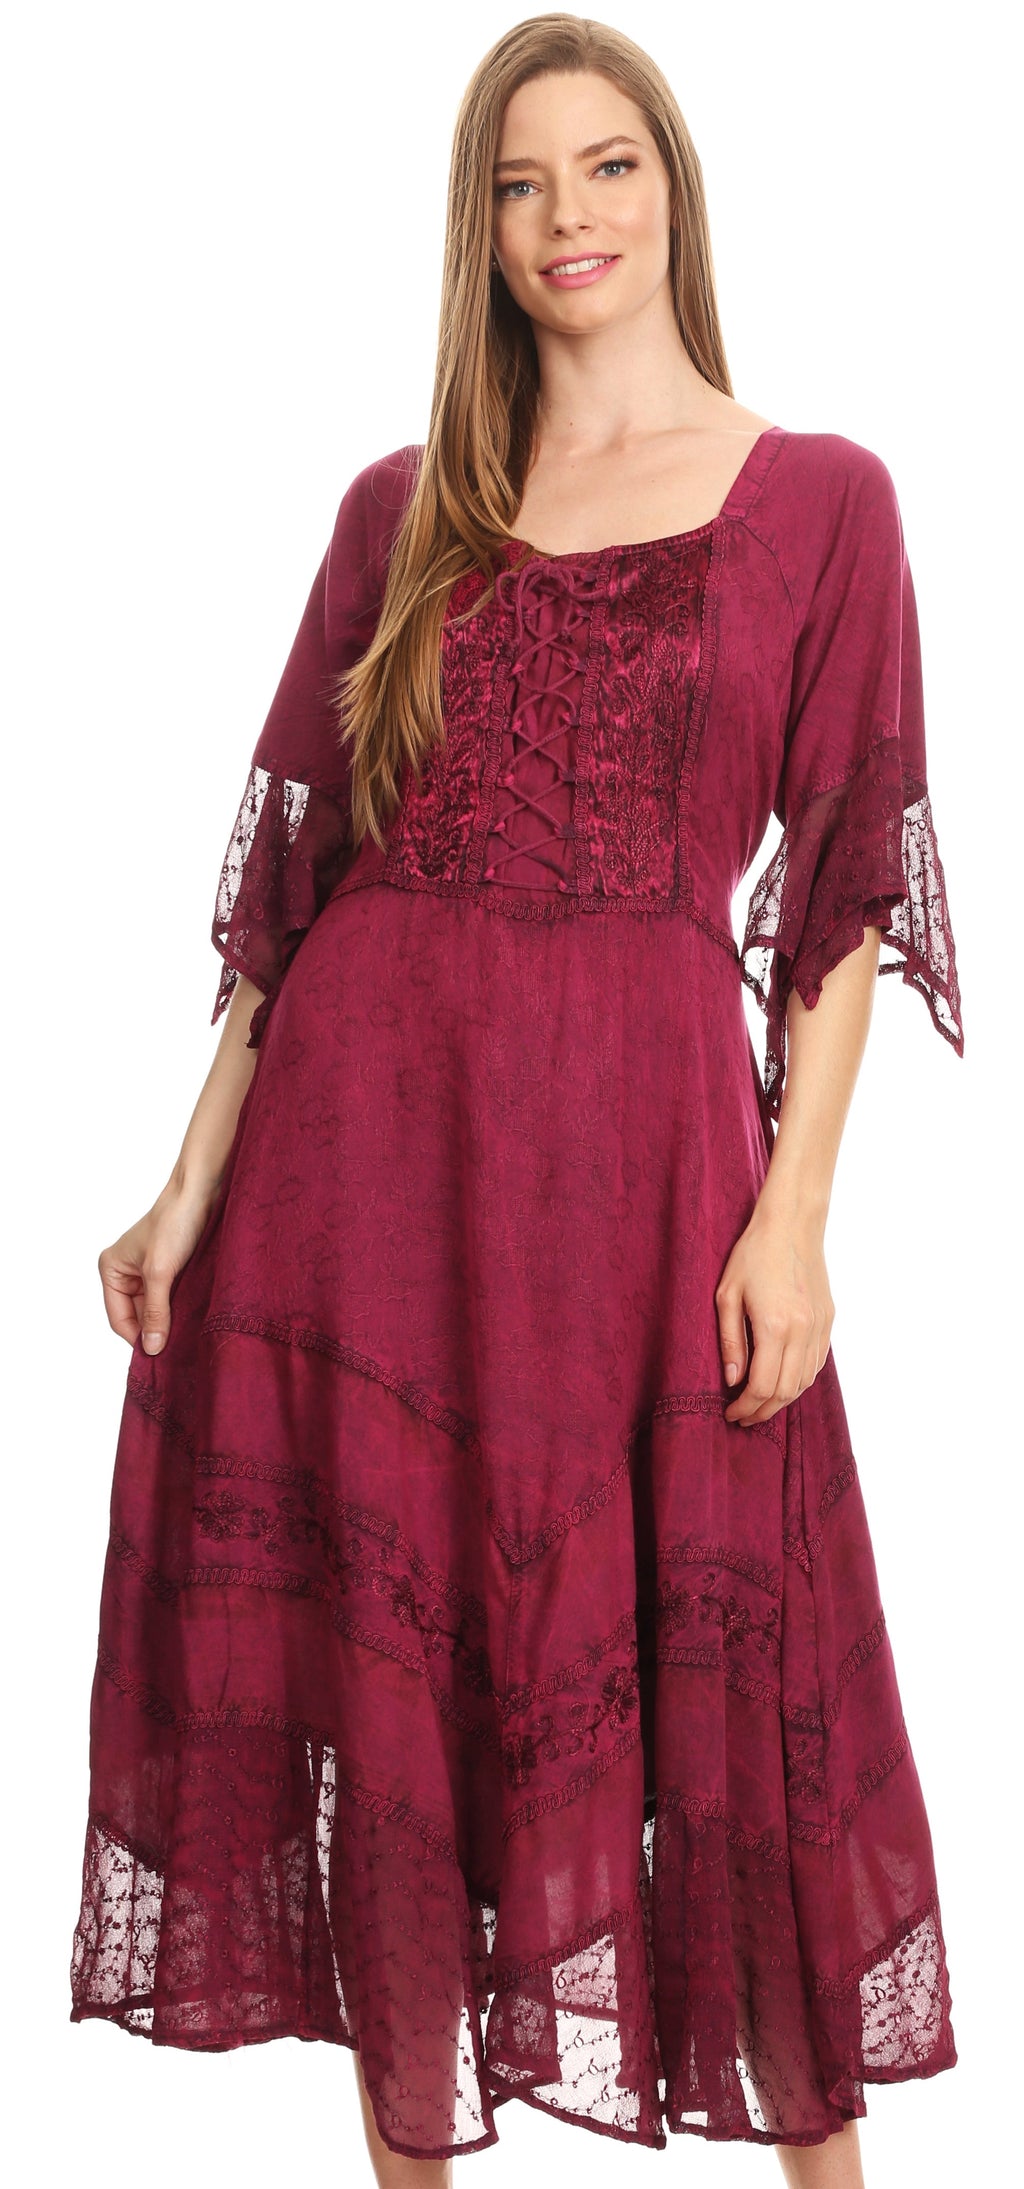 Sakkas Bexley Scoop Neck Bell Sleeve Bohemian Gypsy Embroidered Corset